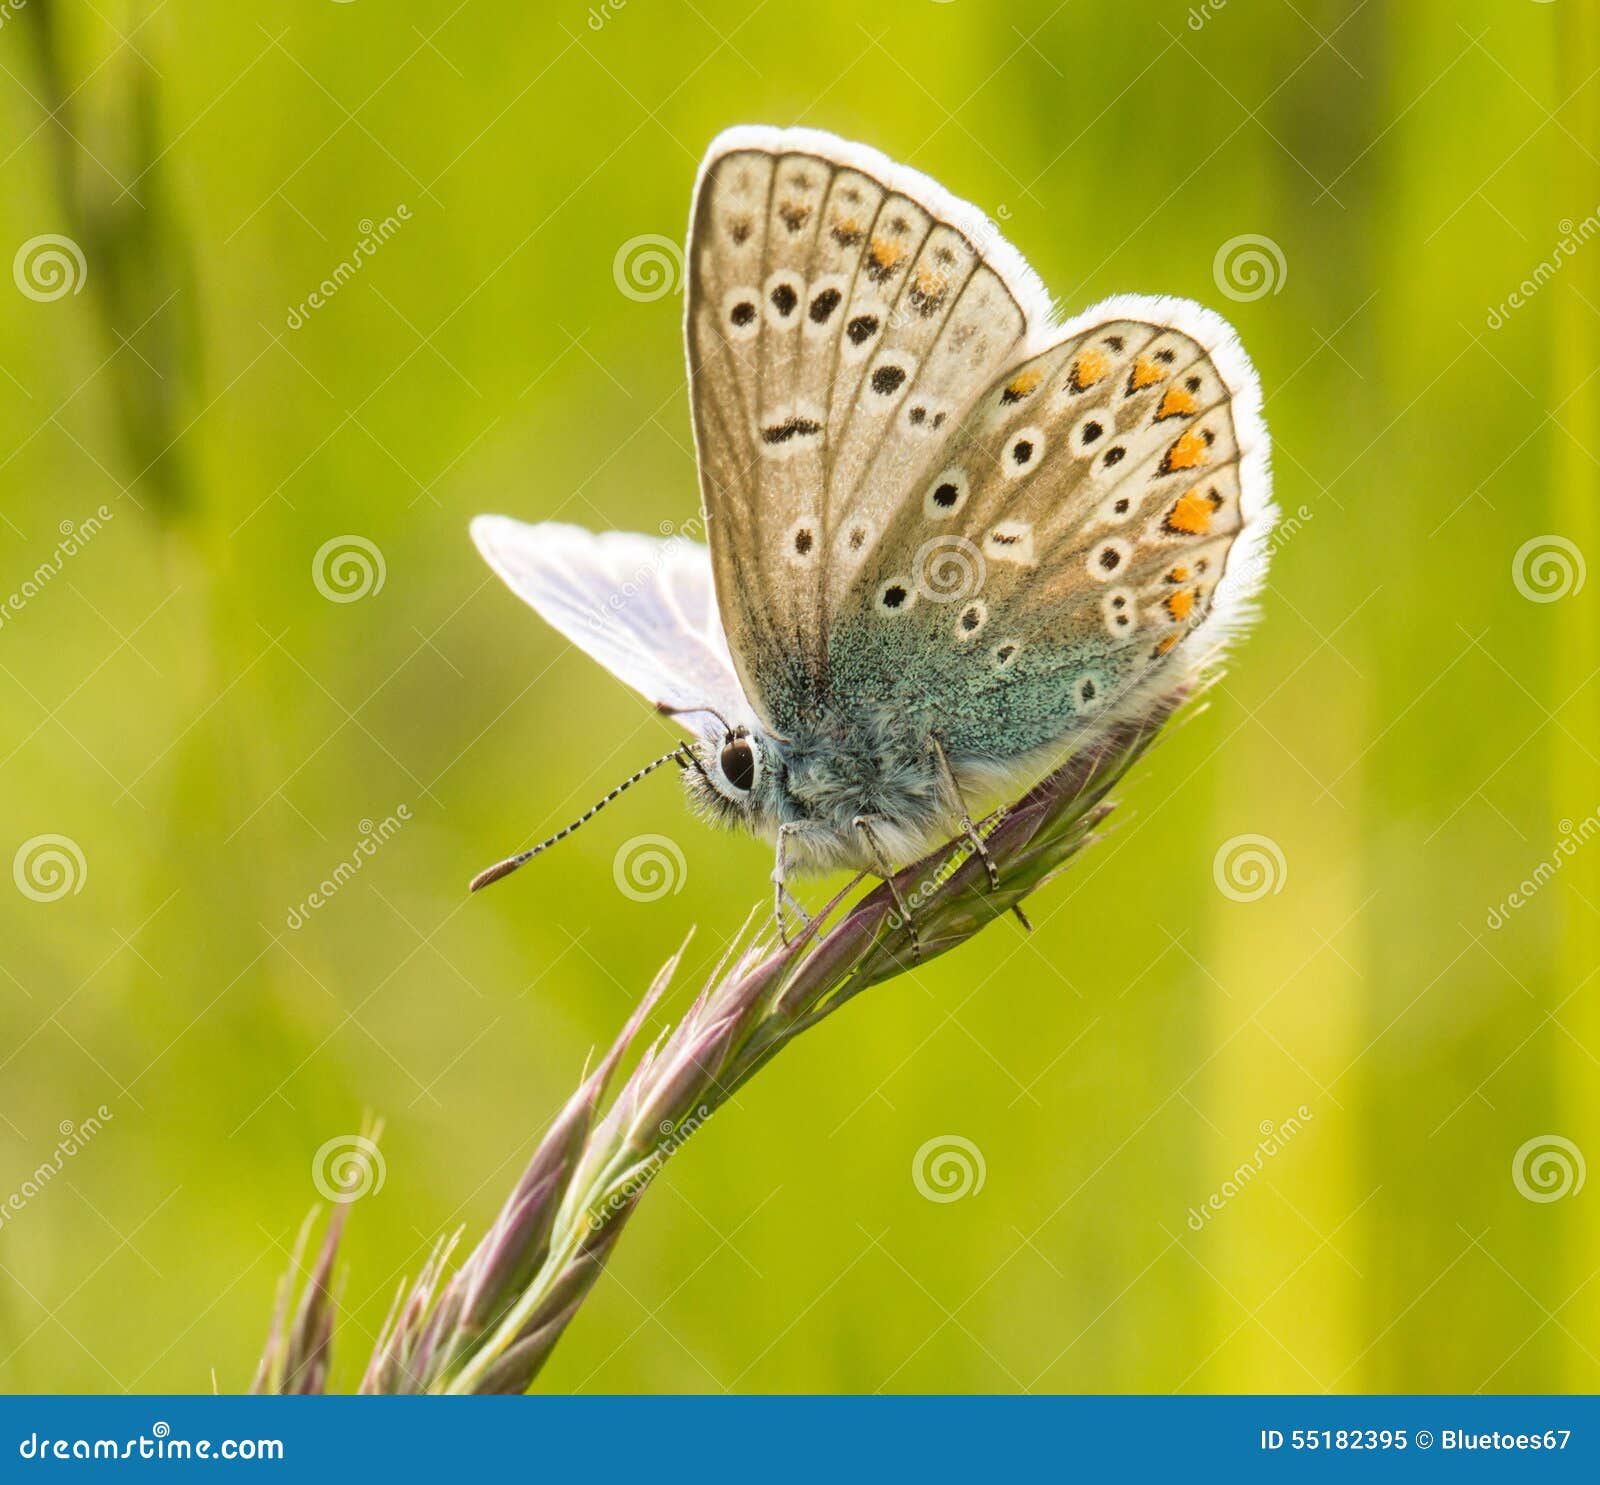 a male common blue butterfly with wings open